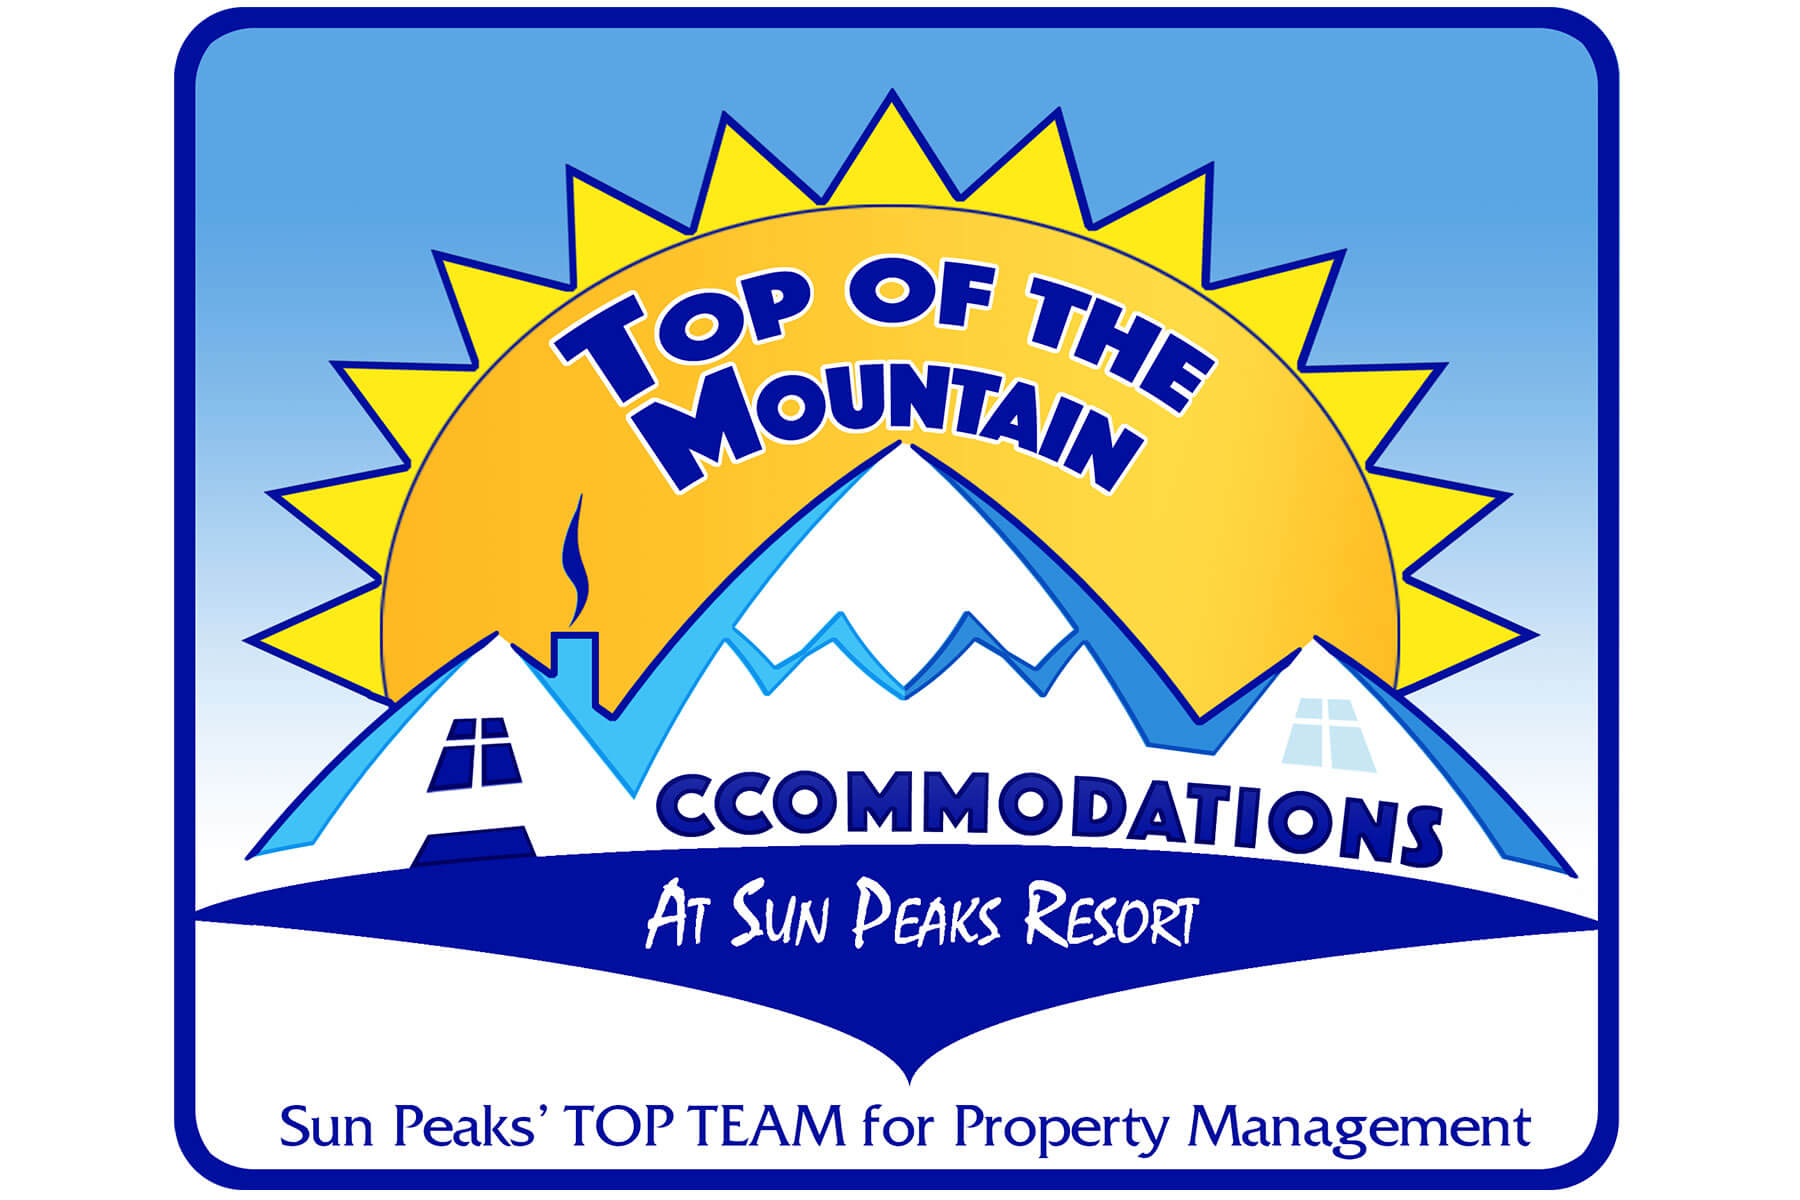 Top of the Mountain & Management Sun Peaks Resort